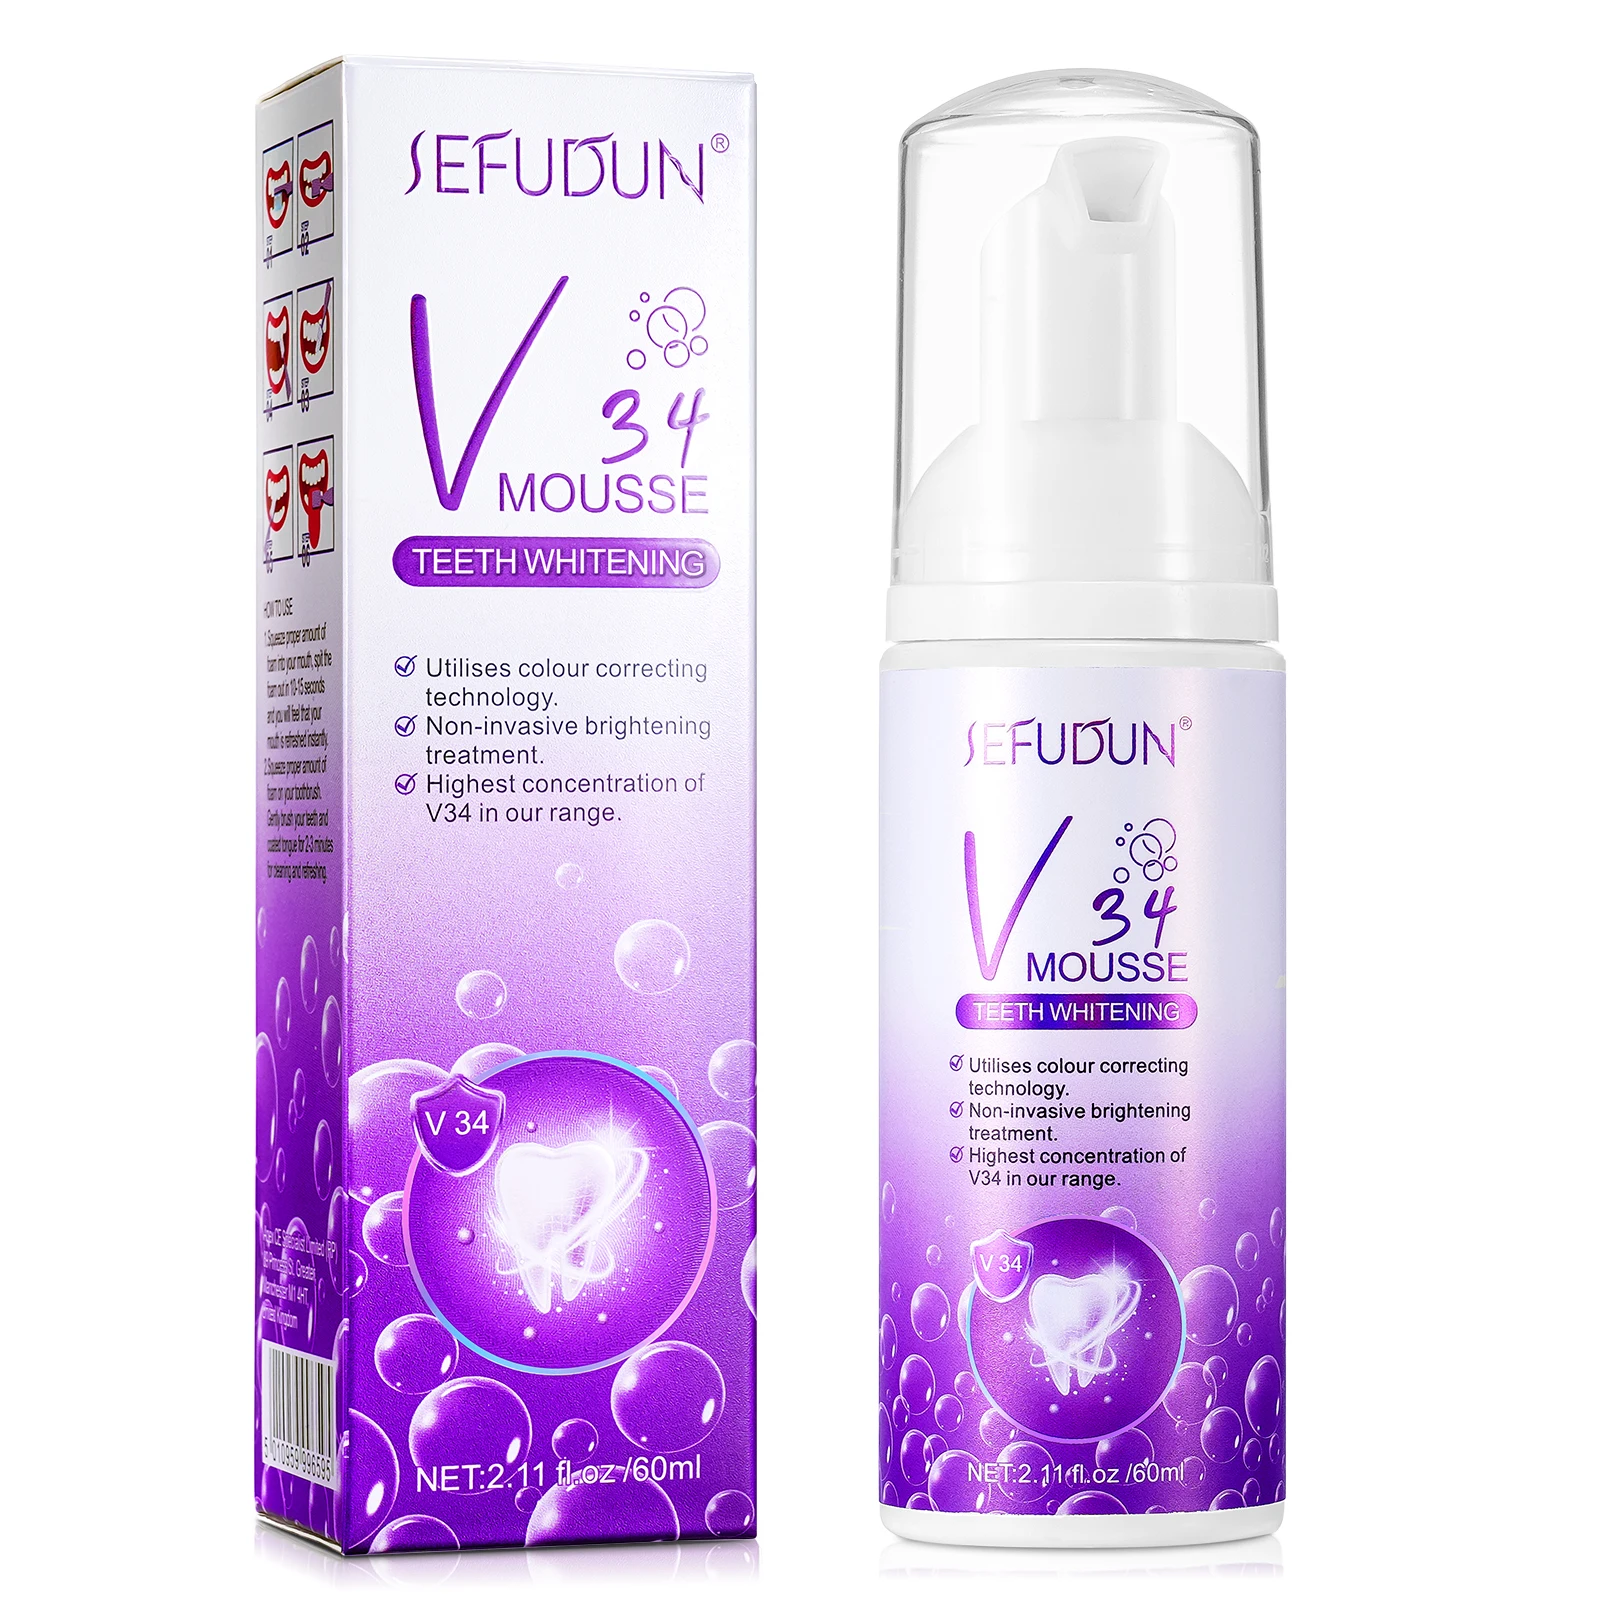 

SEFUDUN Purple Teeth Whitening Mousse Tooth Cleaning White Oral Hygiene Dental Tool Bleaching Remove Stains Toothpaste Foam